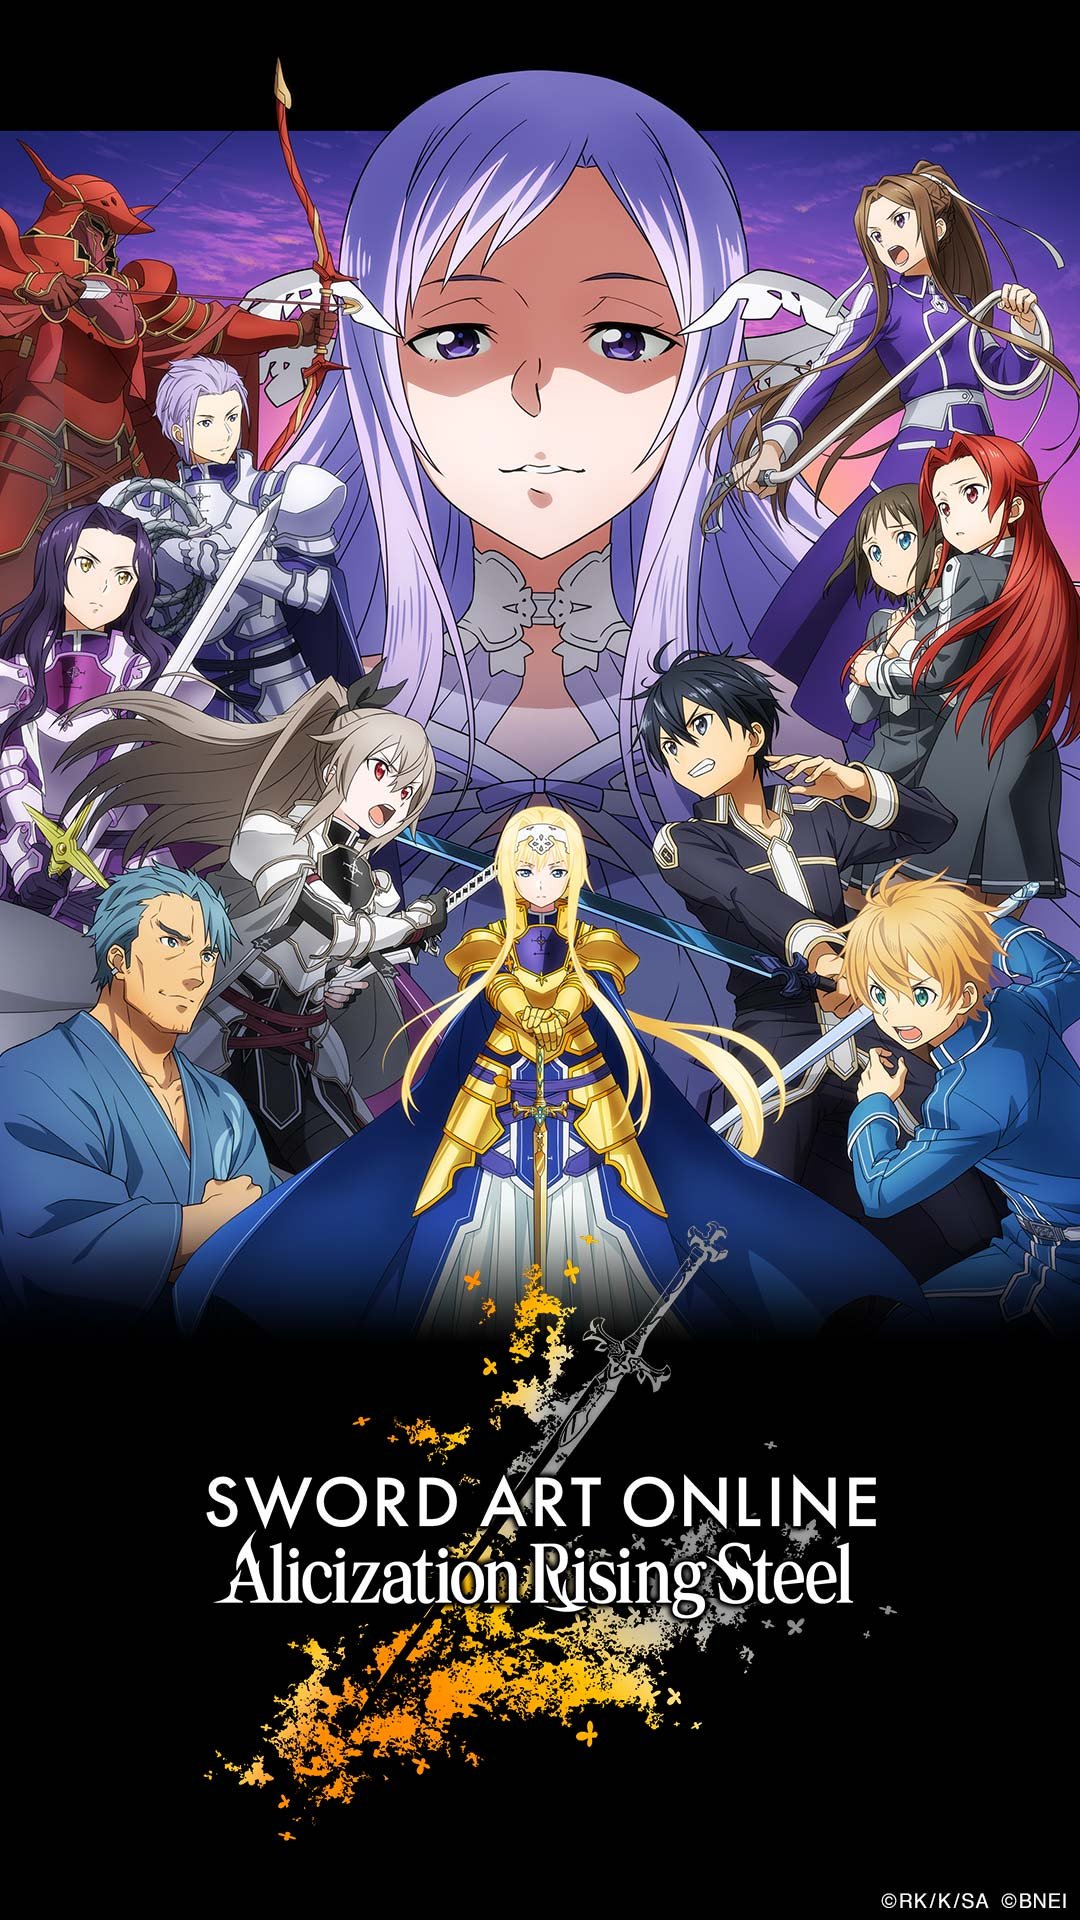 Sword Art Online Alicization Rising Steel Sao Alicization Rising Steel Wallpaper For Your Mobile Phone Join The Pre Register Campaign By Following The Twitter Page Pre Registration At The App Store And Google